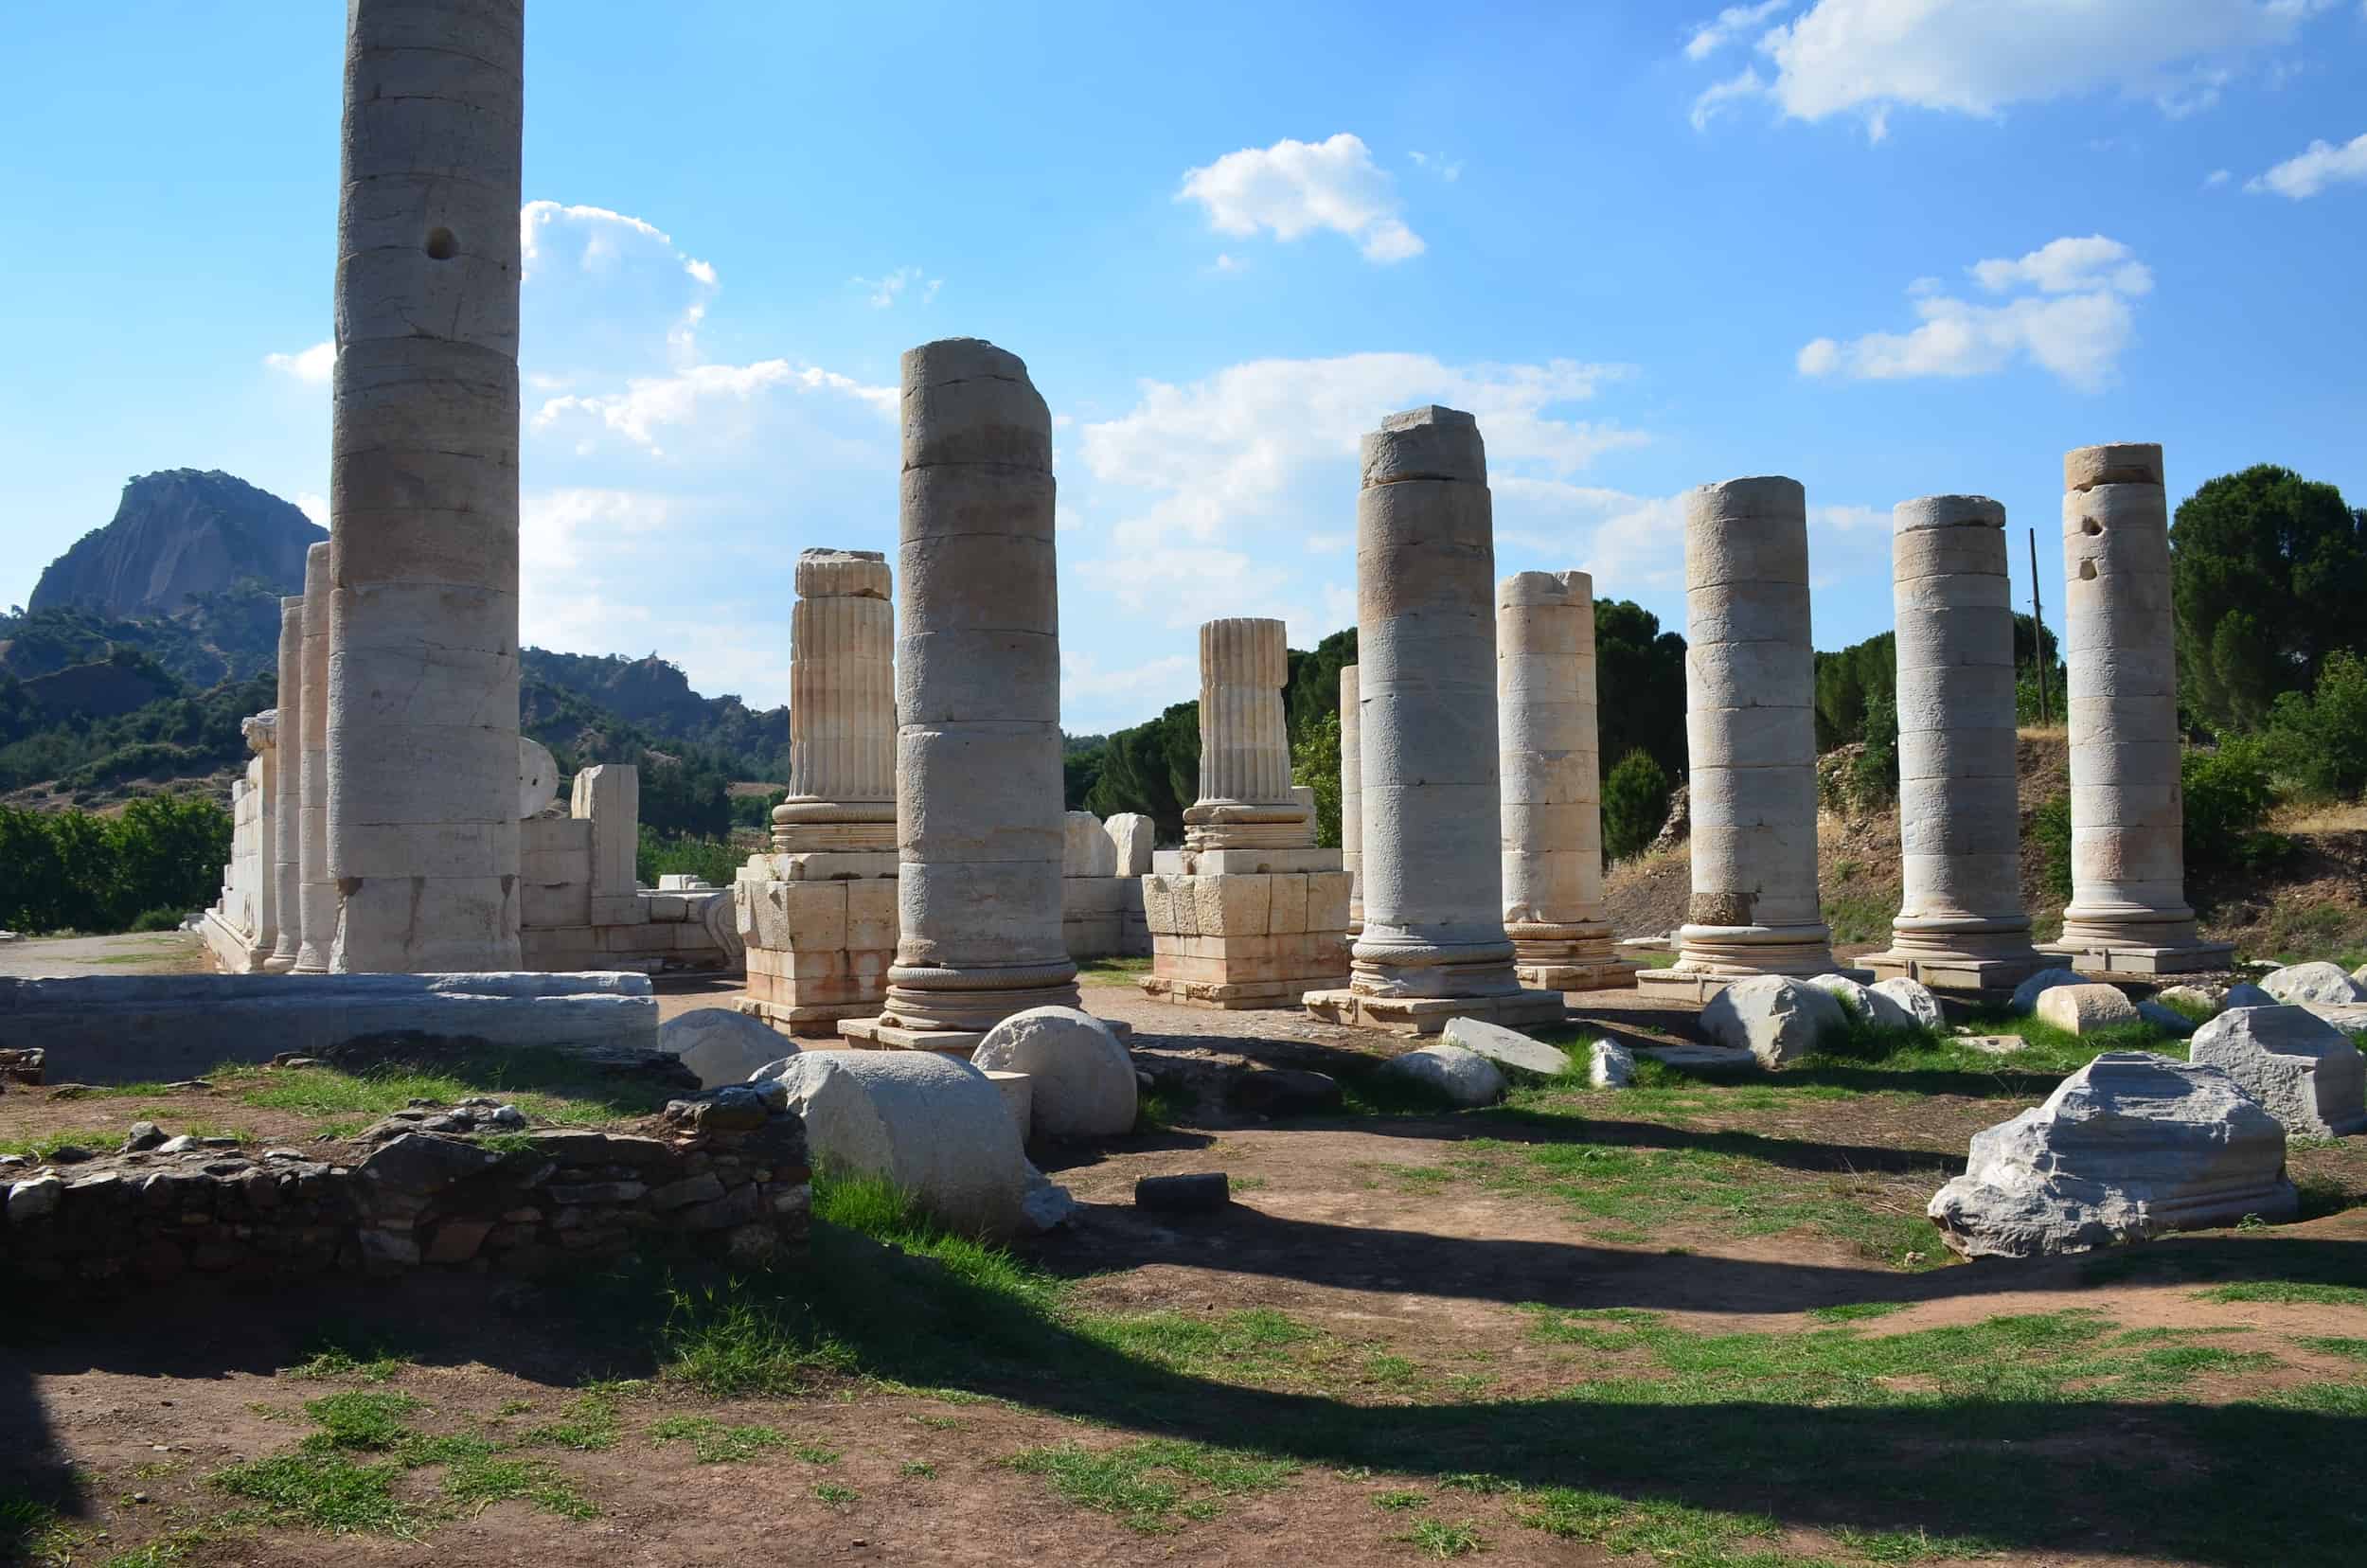 Unfinished colonnade of the Temple of Artemis